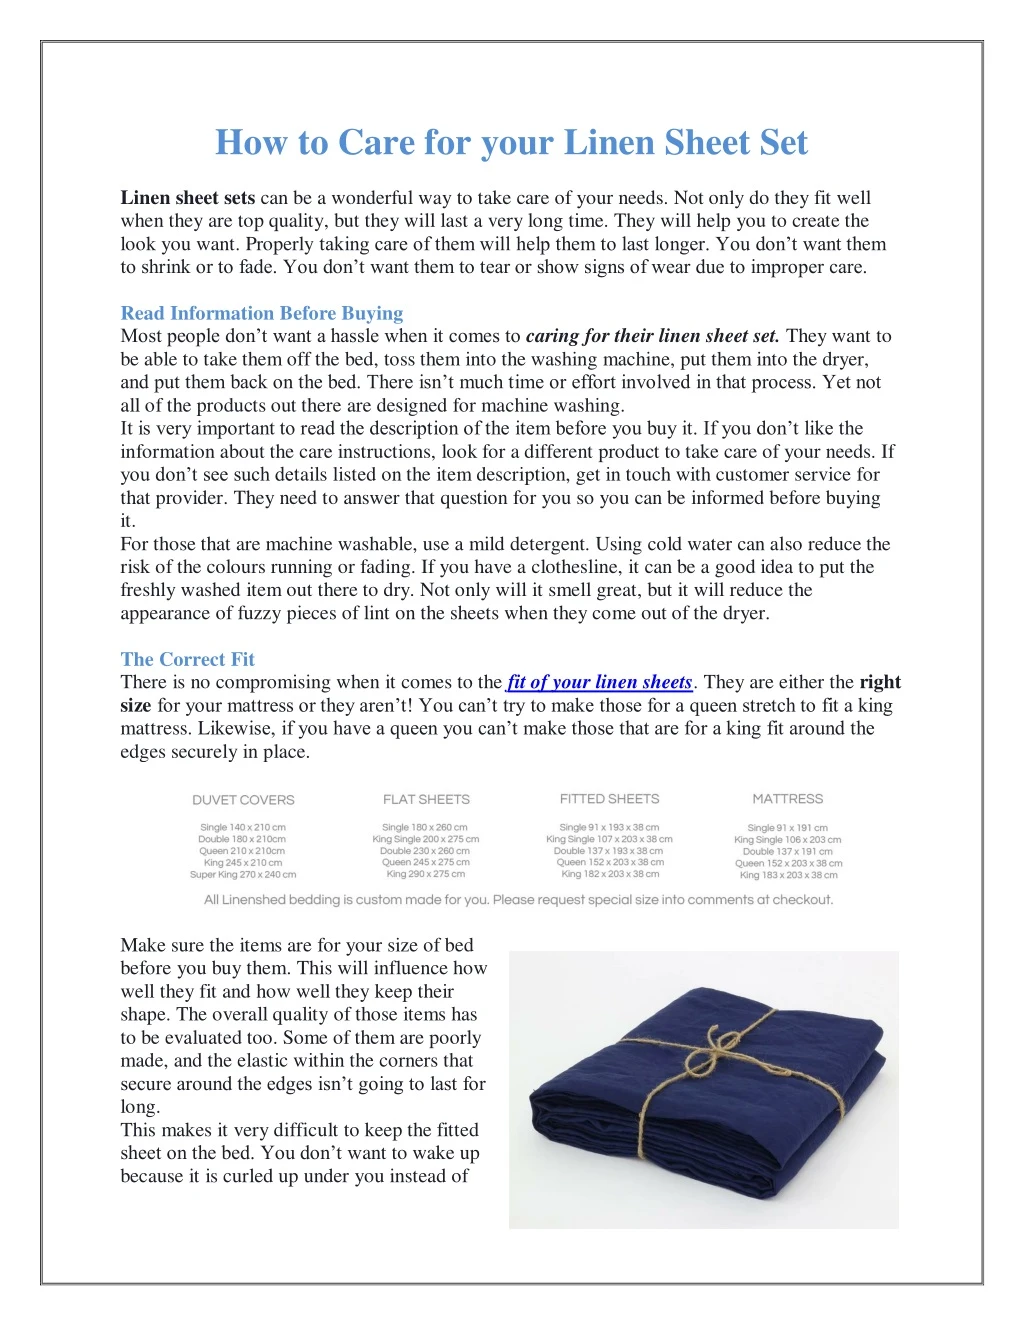 how to care for your linen sheet set